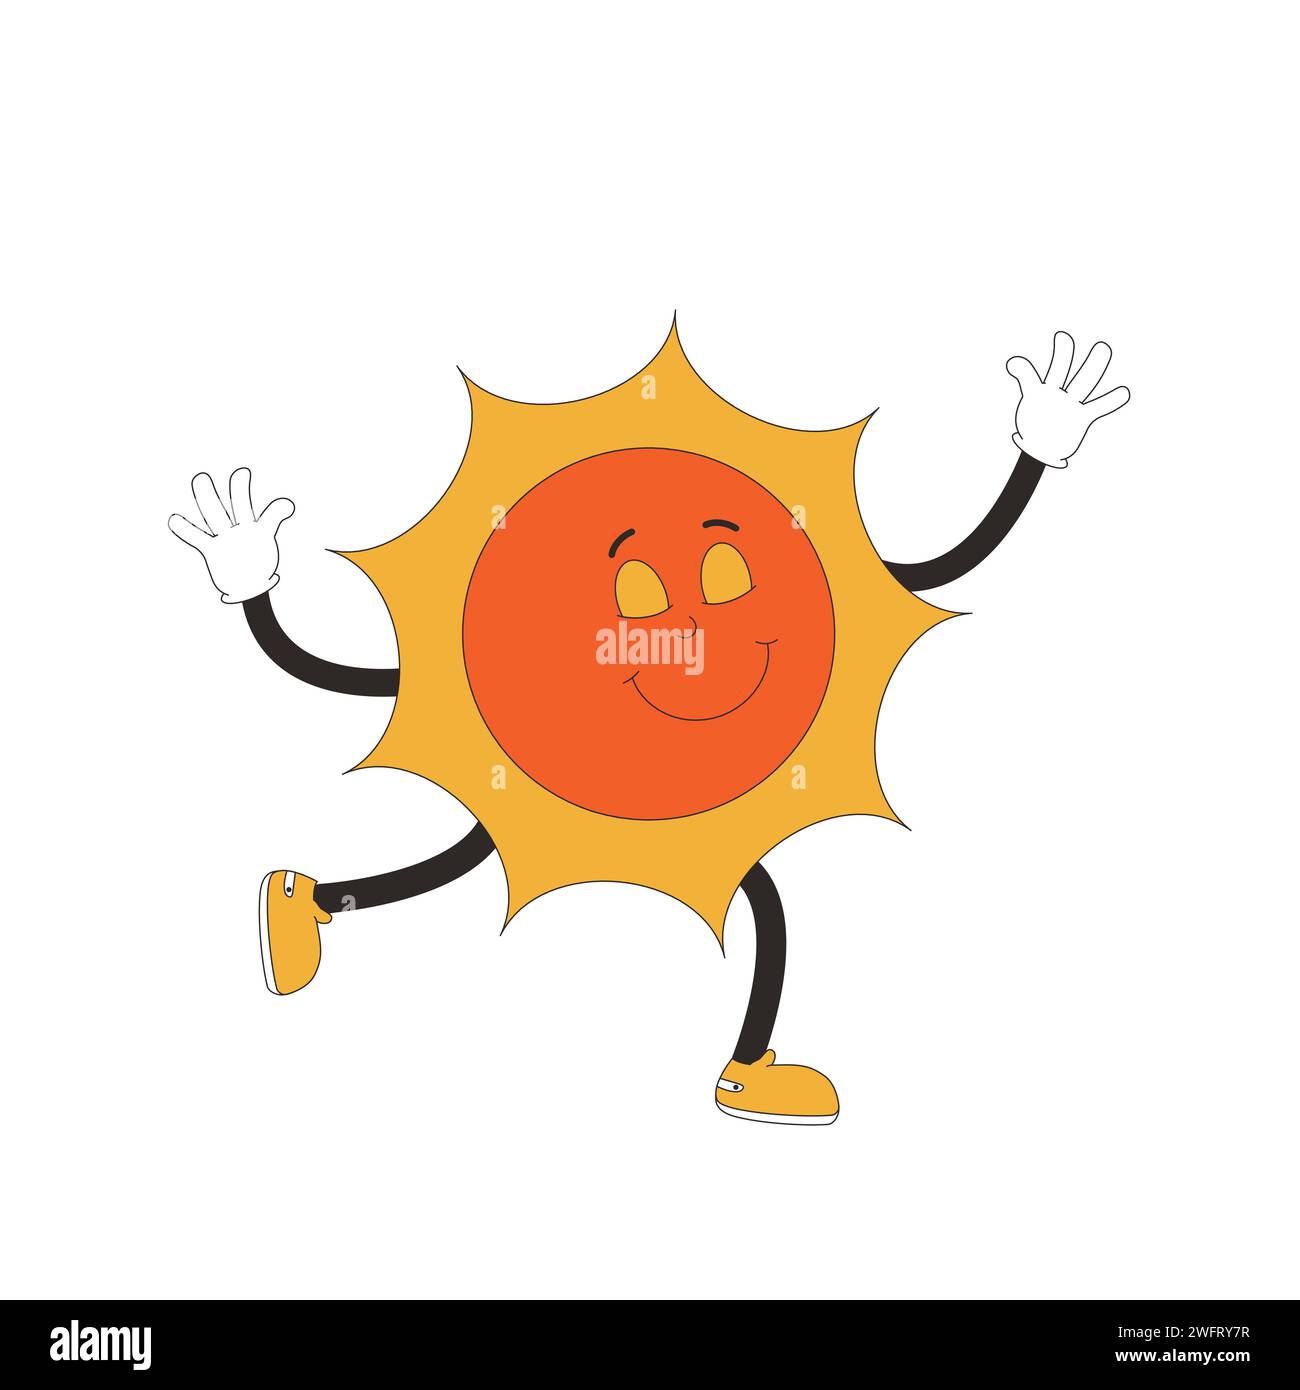 Sun cartoon character waving hand in retro style. Smiling cosmos star character isolated on white background. Vector illustration. Stock Vector